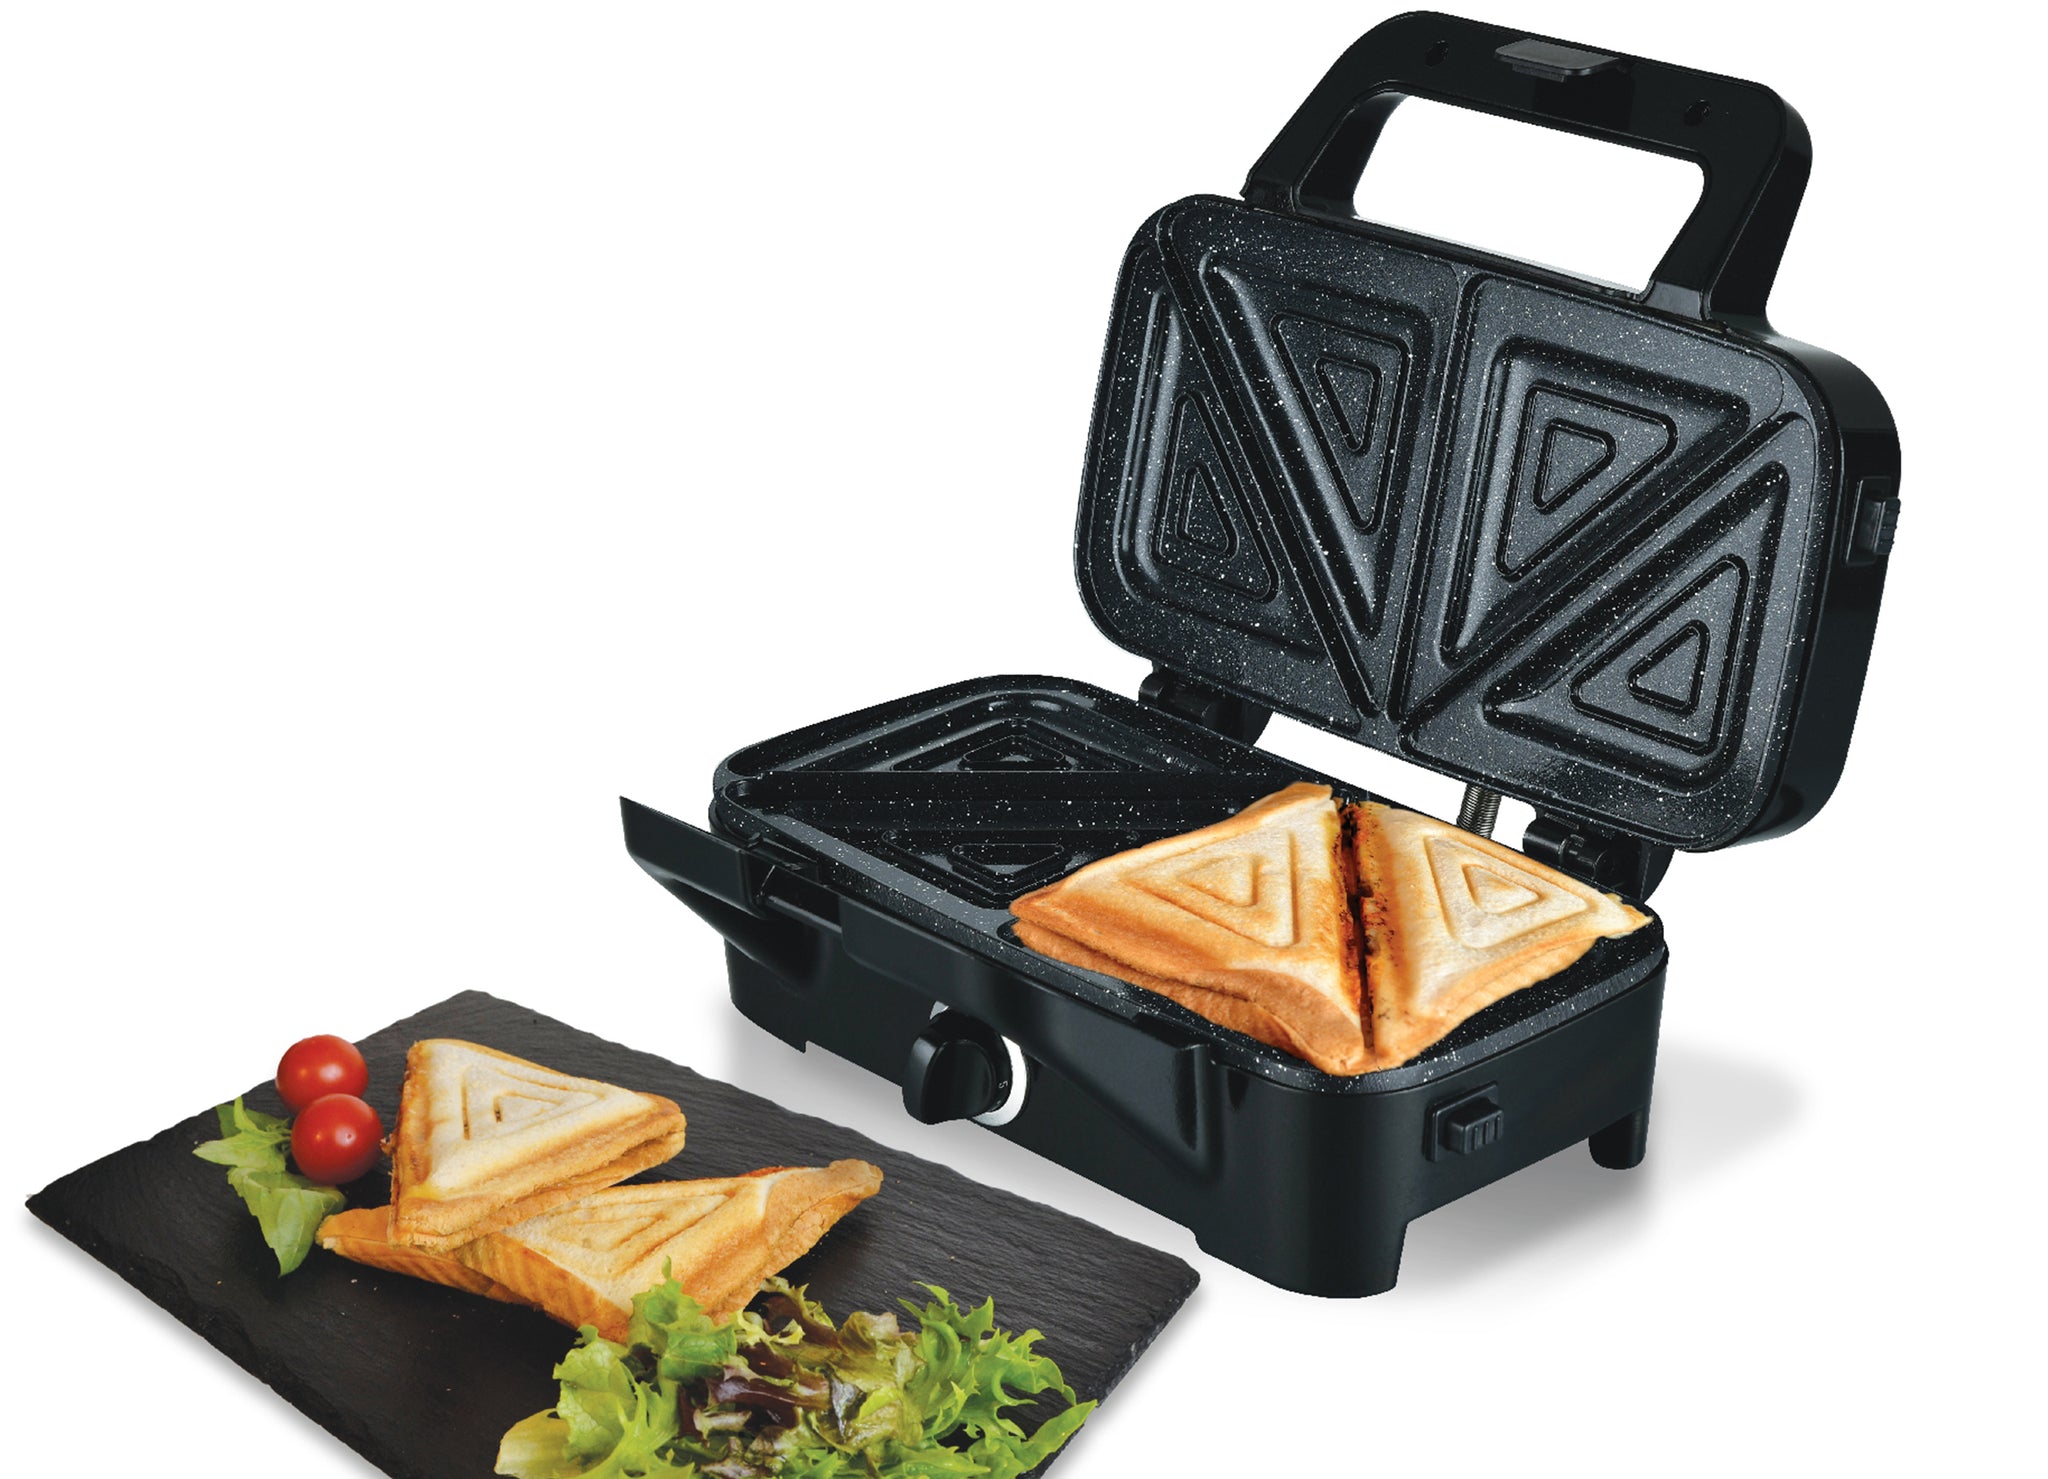 A/C Sandwich Maker 3 in 1 Waffle Maker with Removable Plates, 1200W Panini  Press Grill, 5-Gears Temperature Control and LED Indicato